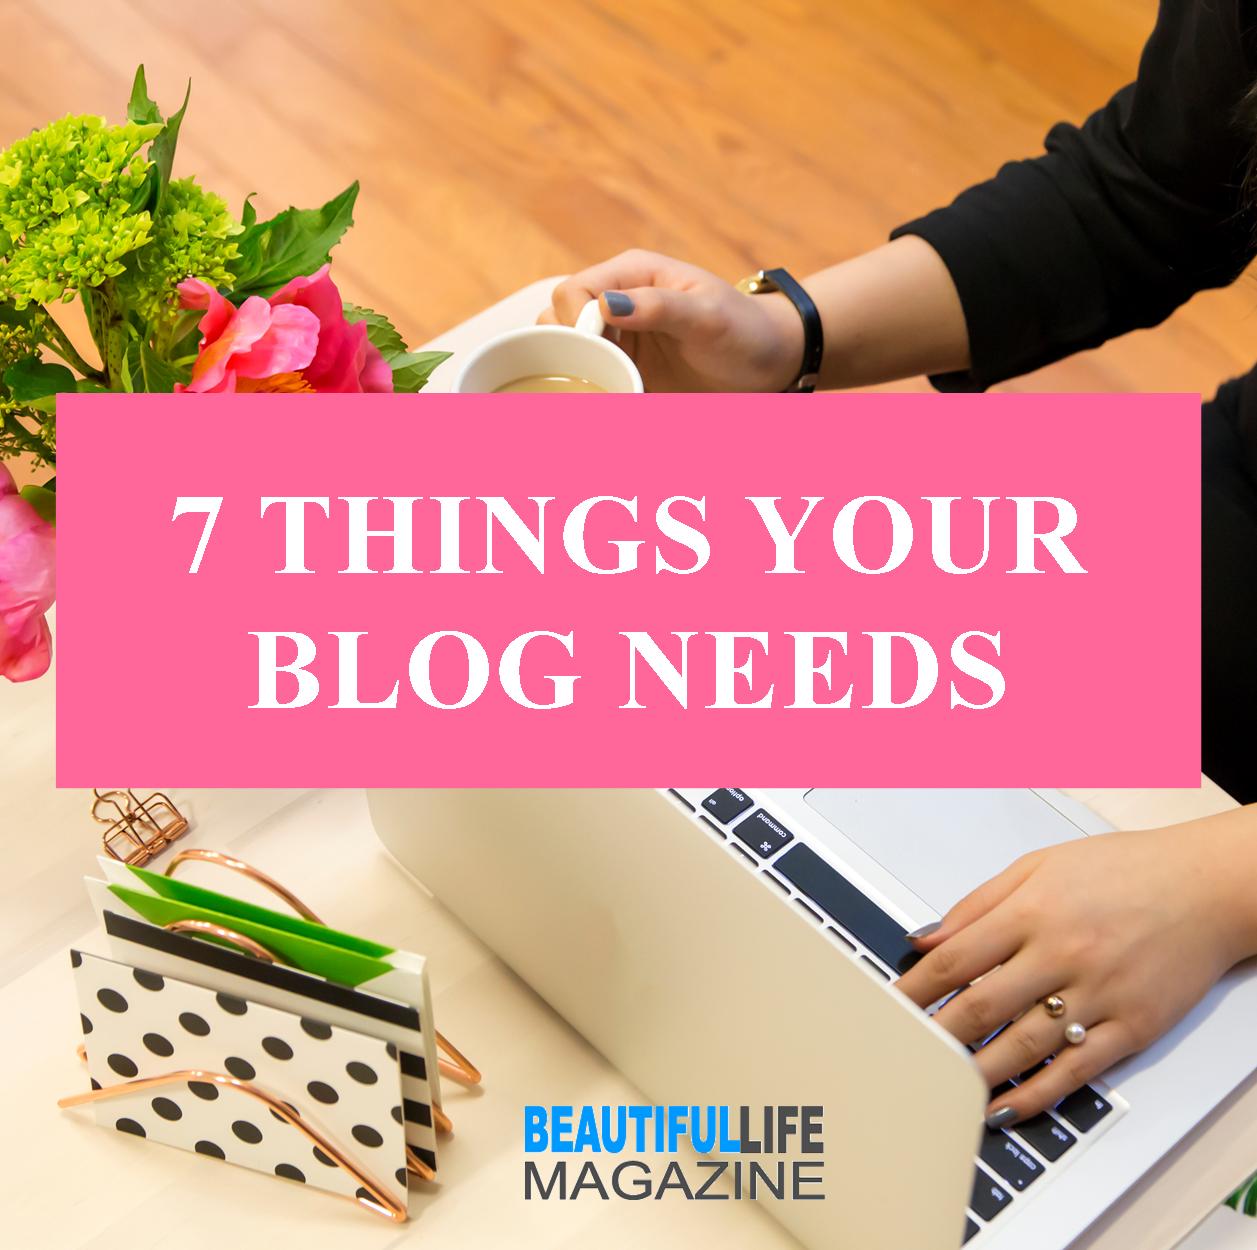 The list below are the 7 things your blog needs. Don’t skip these things. They’re what your readers want and are looking for. Don’t forget them.